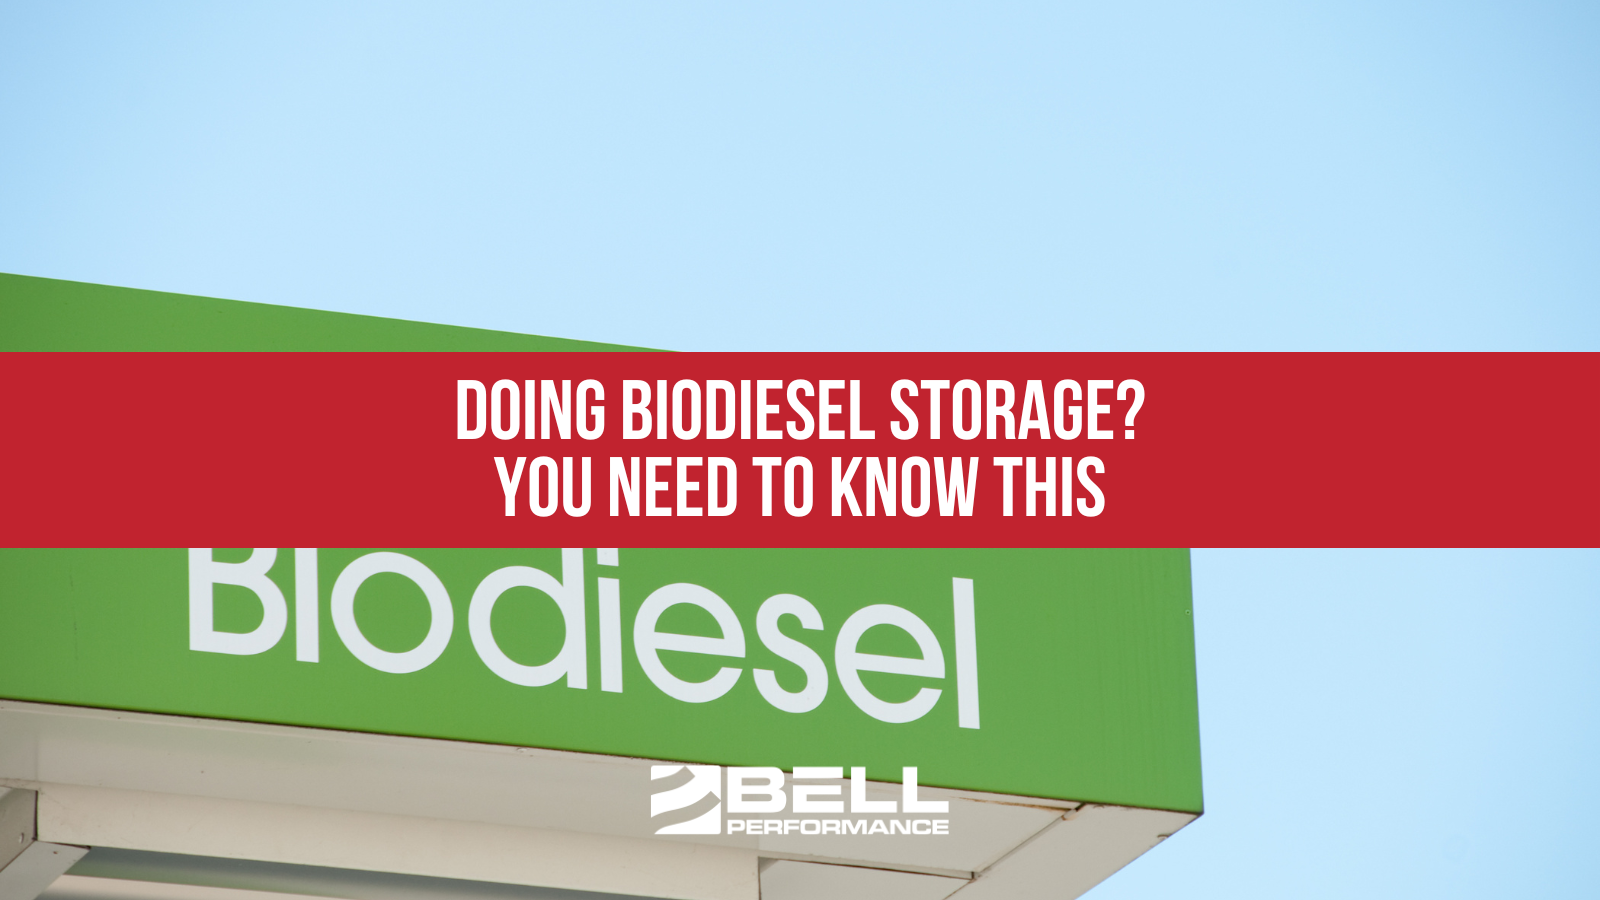 Doing biodiesel storage? You need to know this